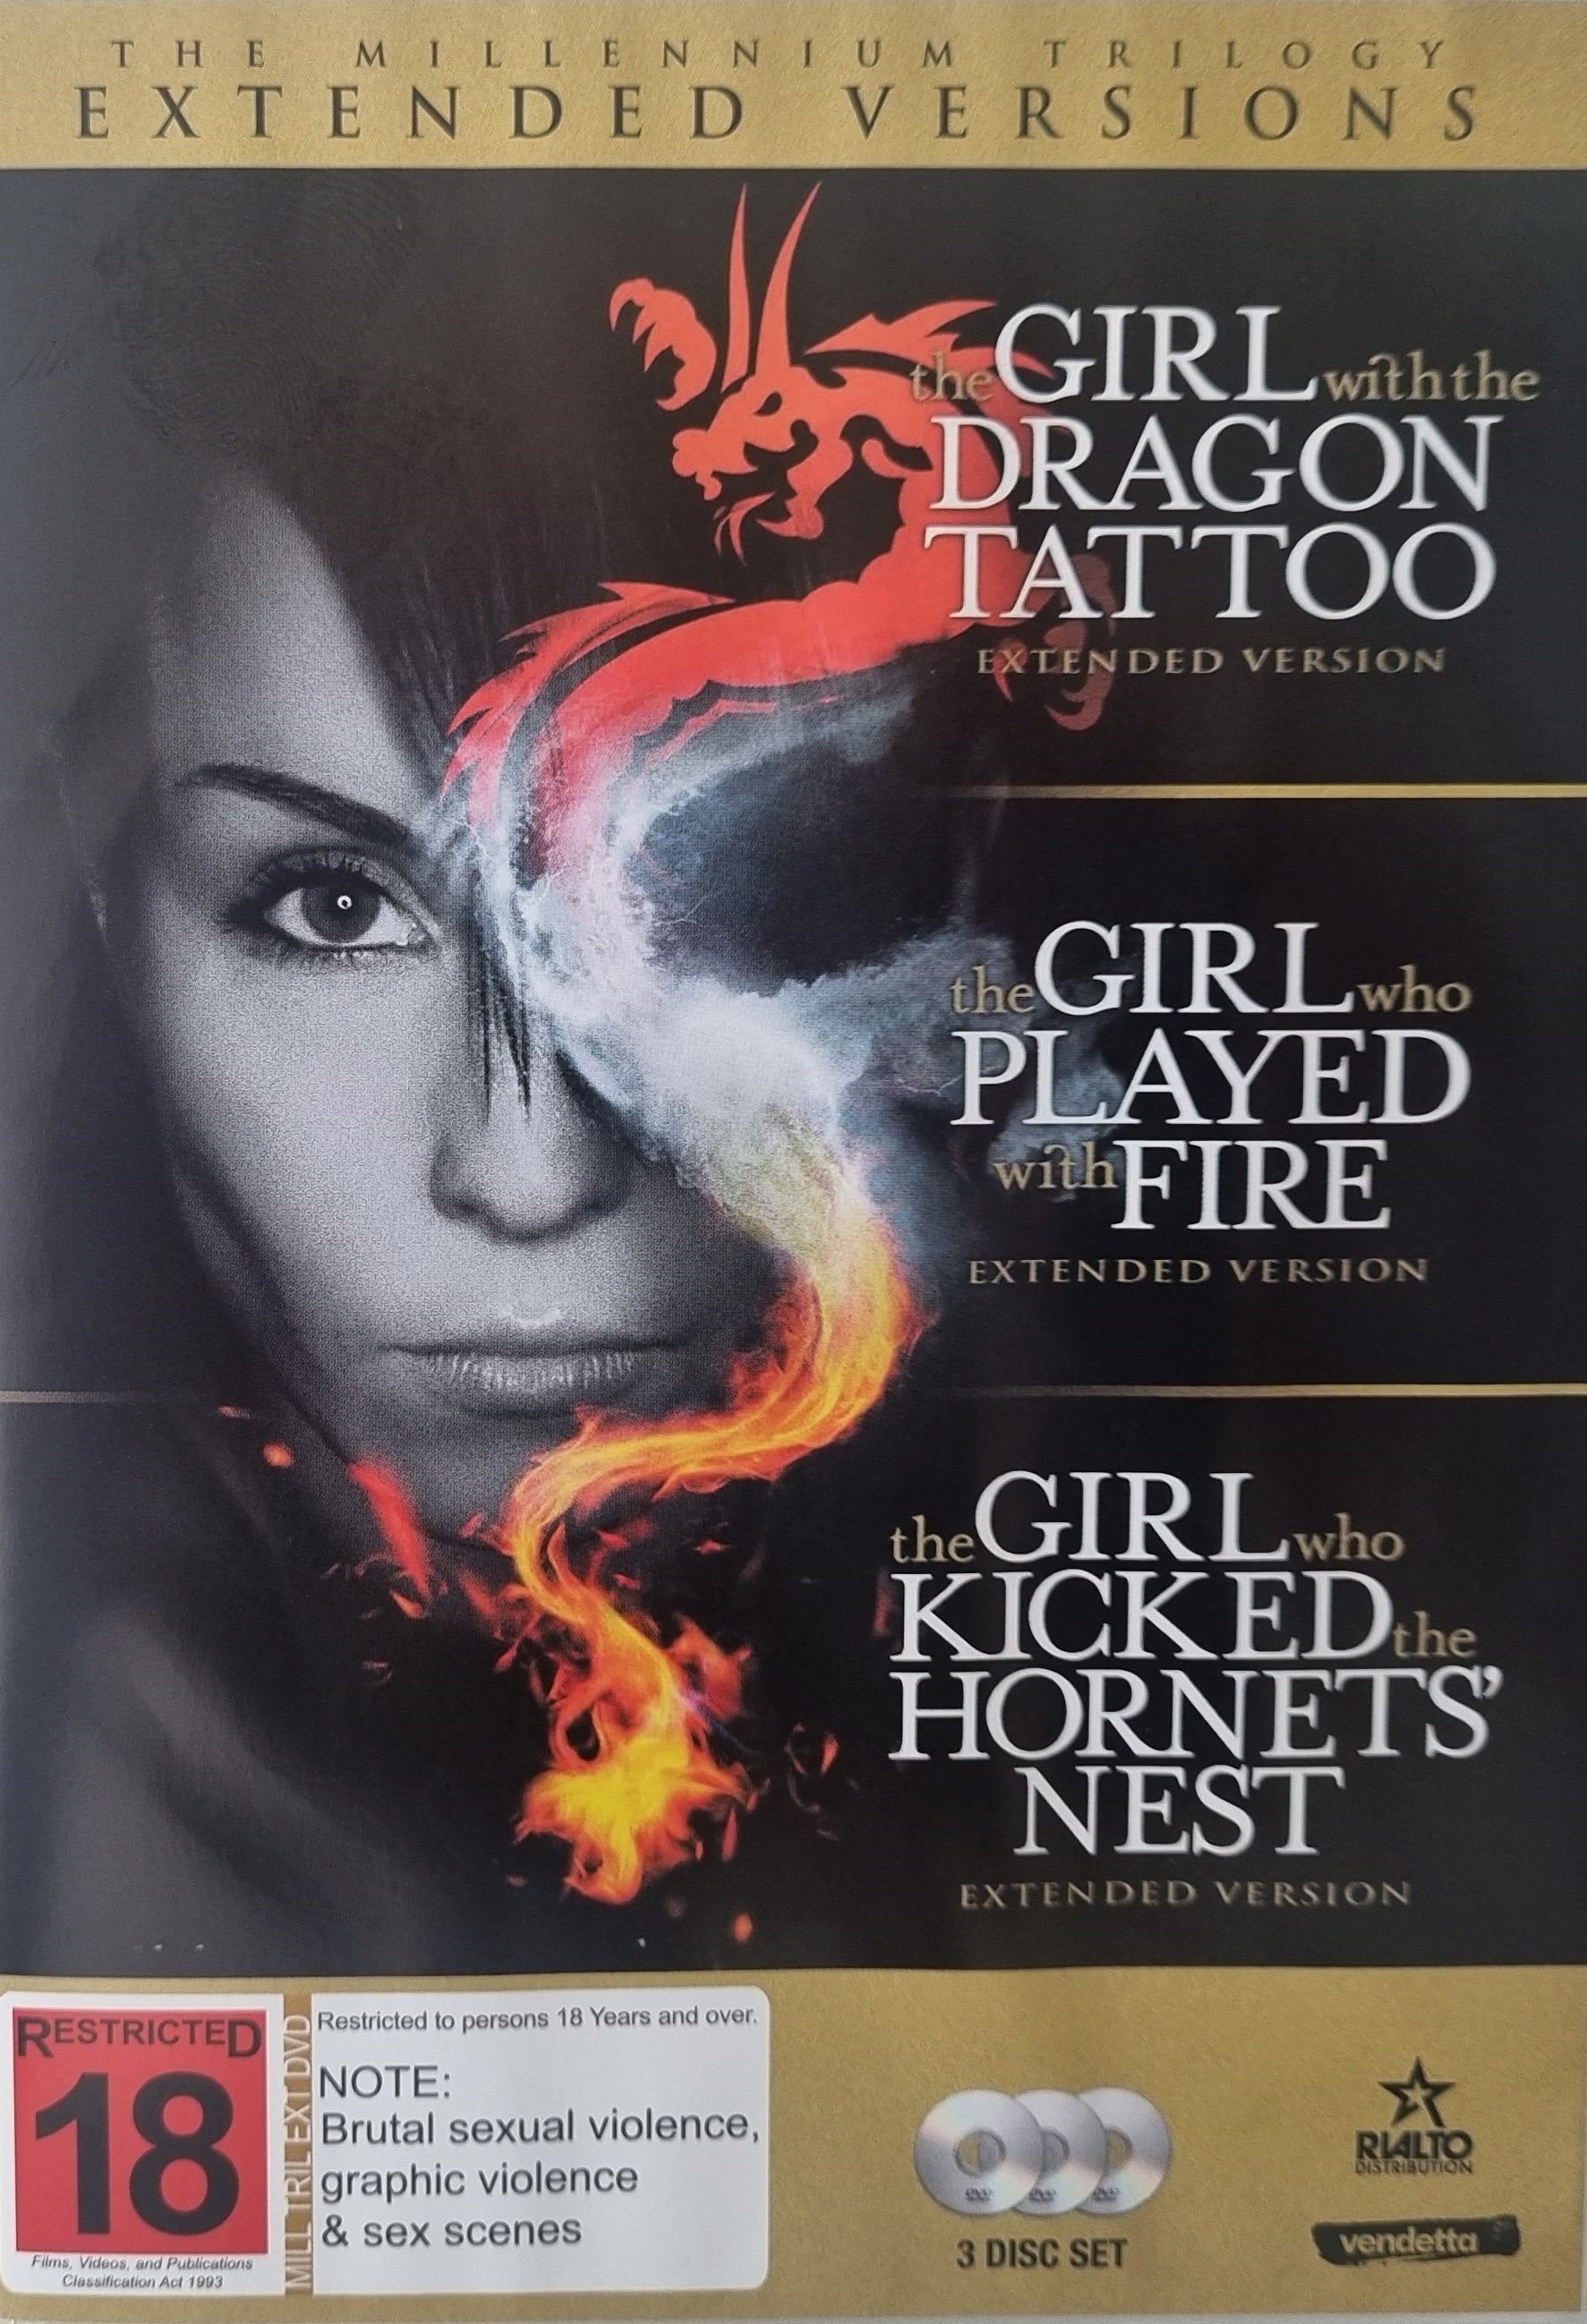 Millennium Trilogy: Girl with Dragon Tattoo / Played with Fire / Hornets' Nest